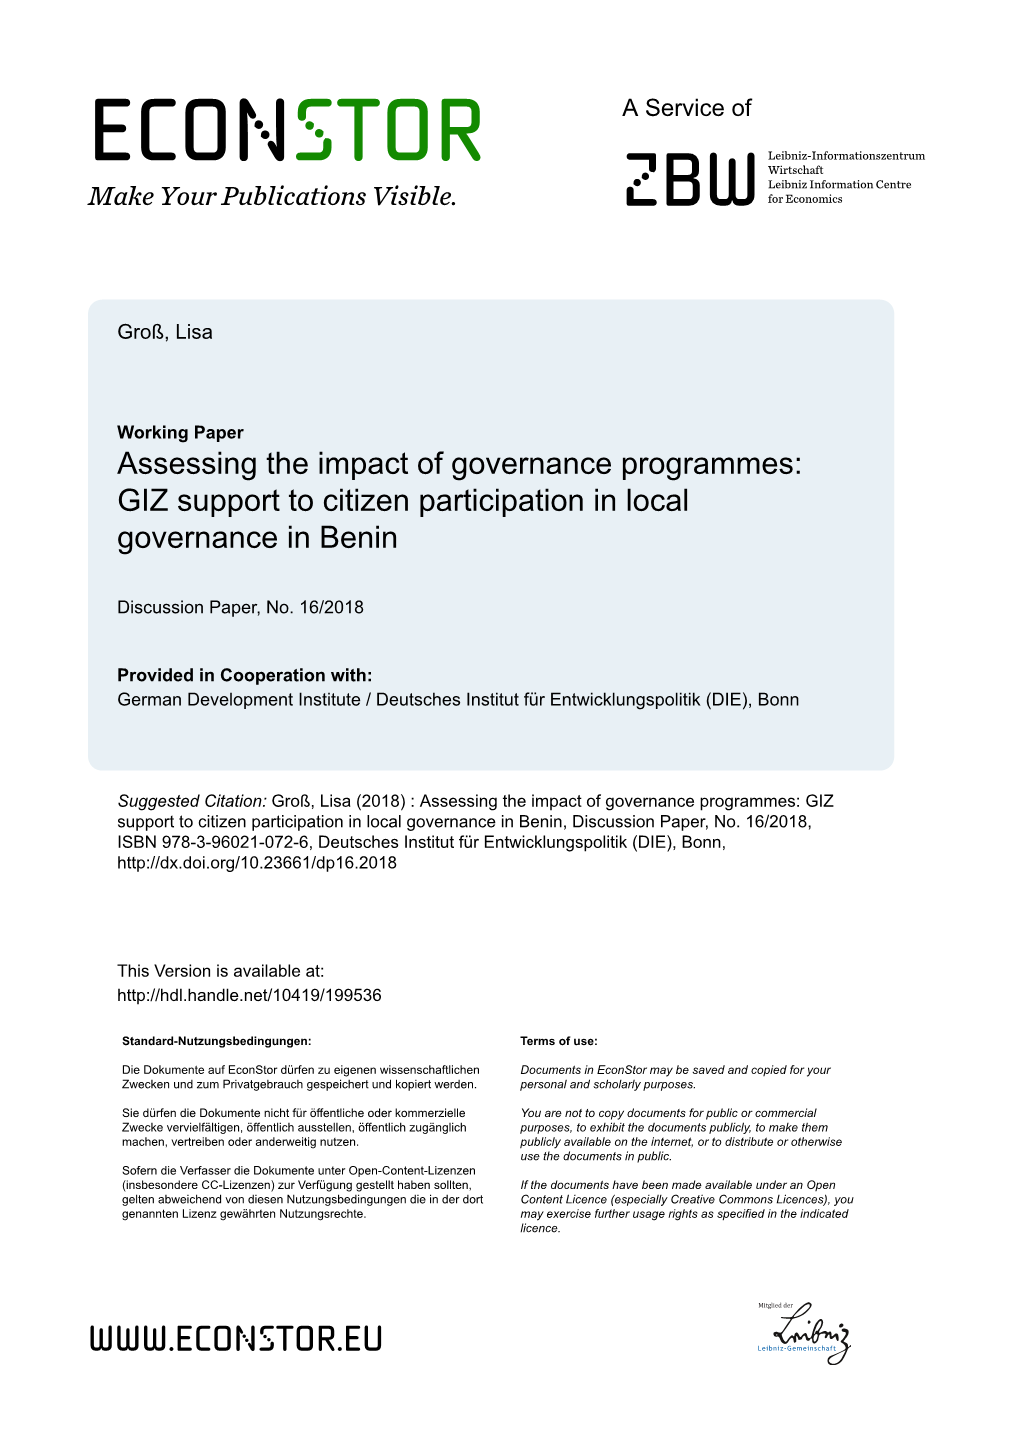 Assessing the Impact of Governance Programmes: GIZ Support to Citizen Participation in Local Governance in Benin